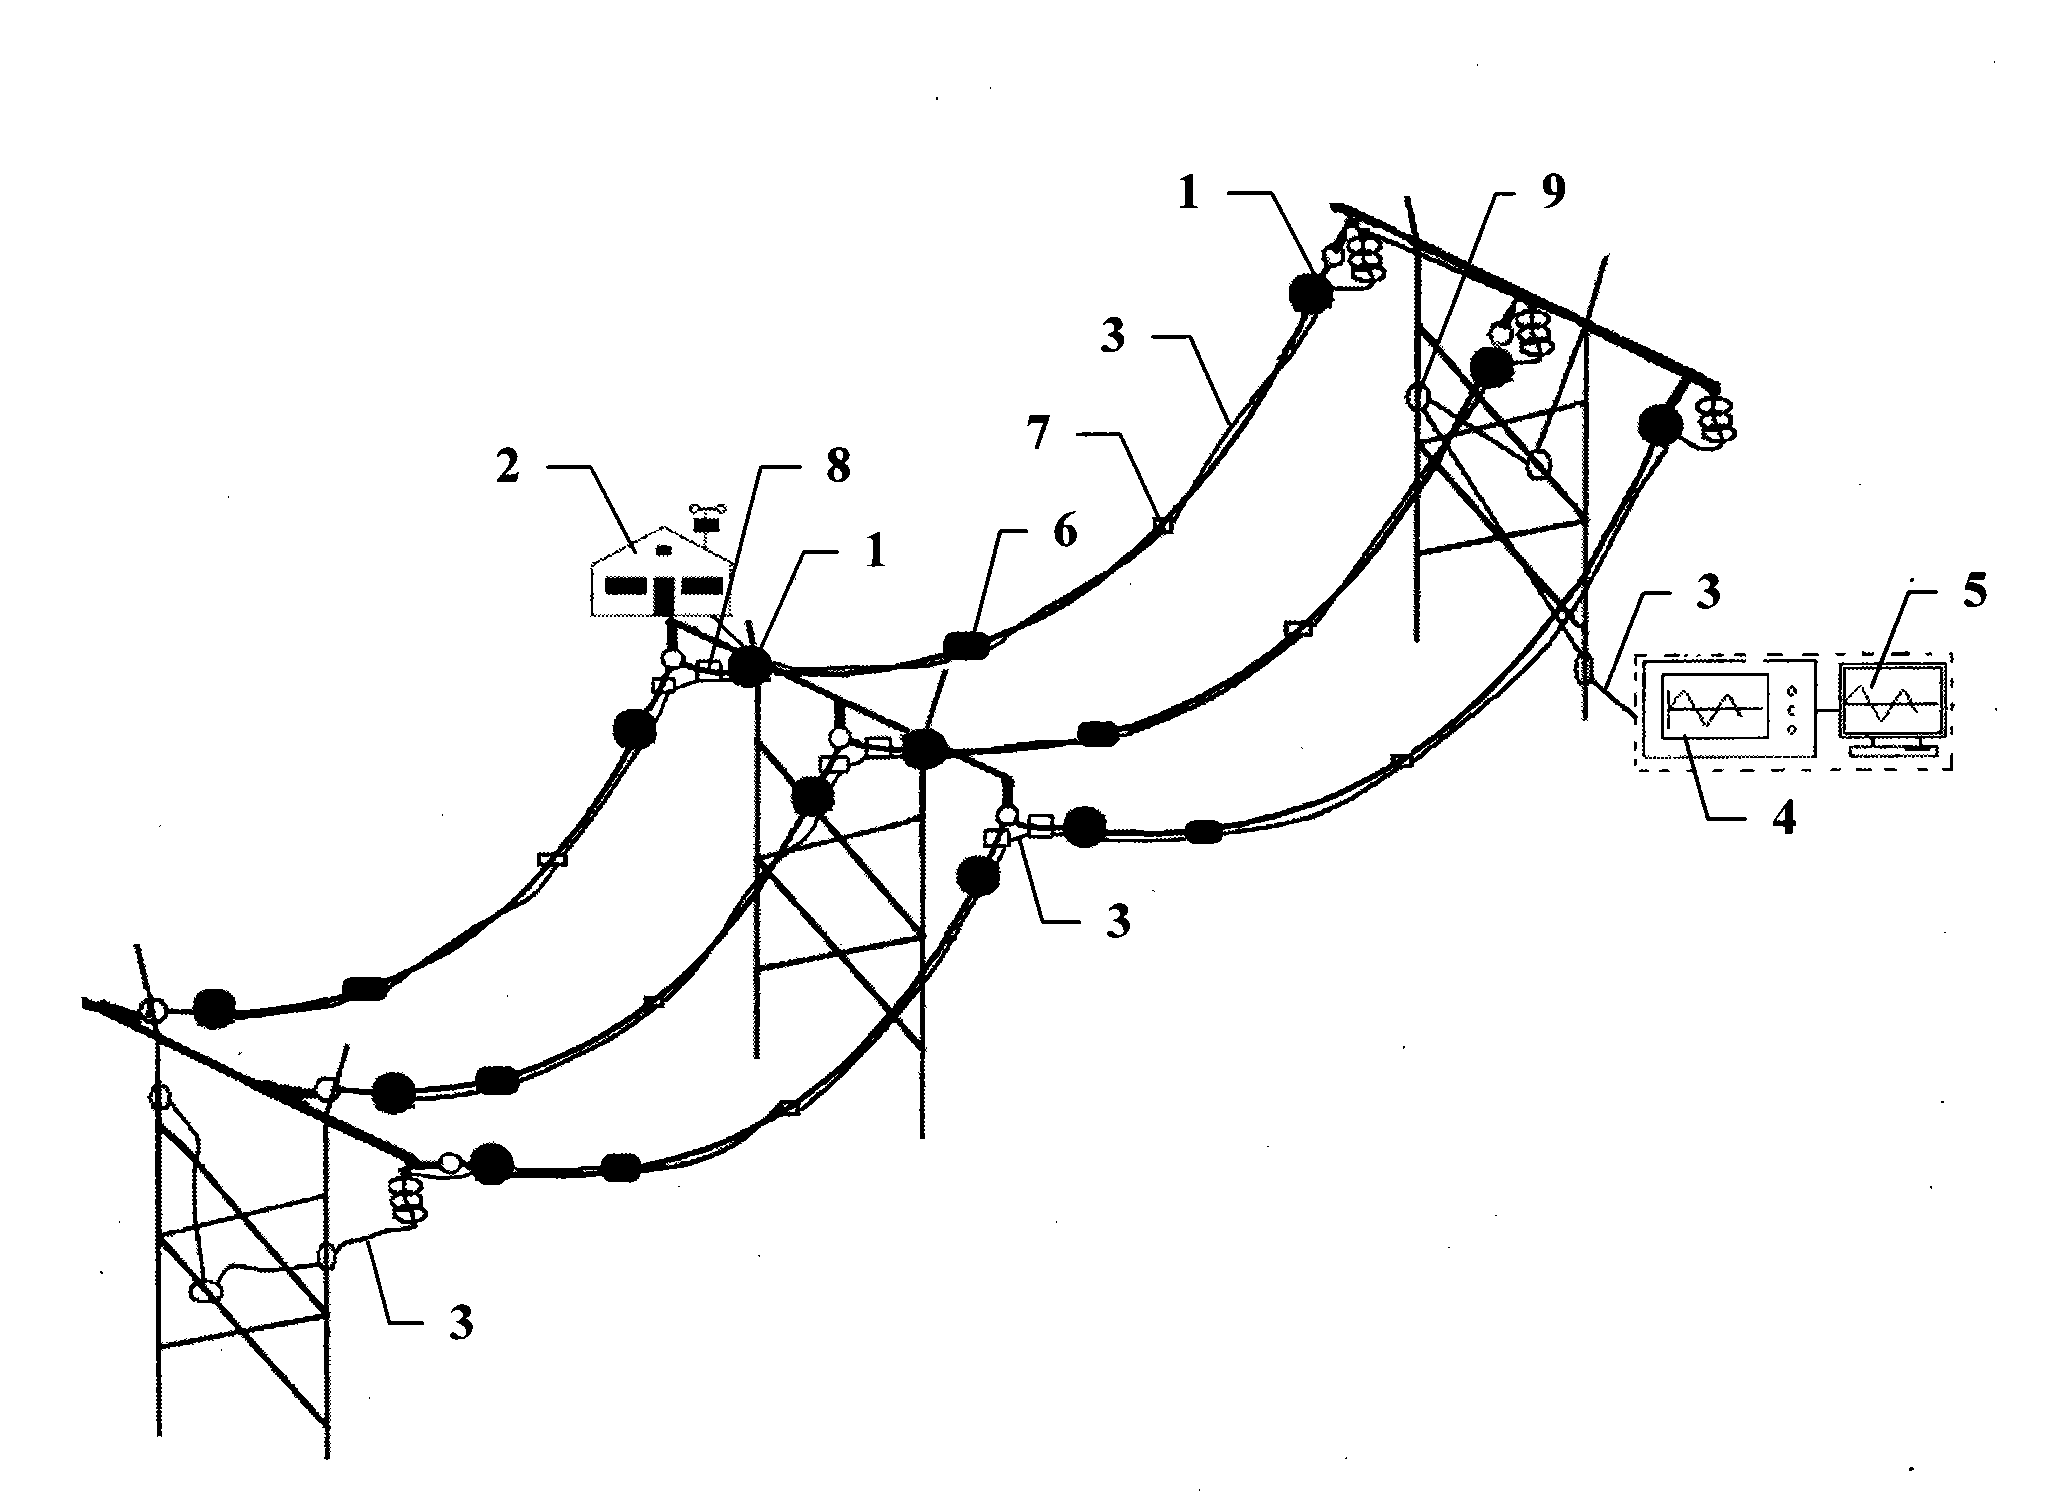 Device for monitoring state of power transmission line tower-line system